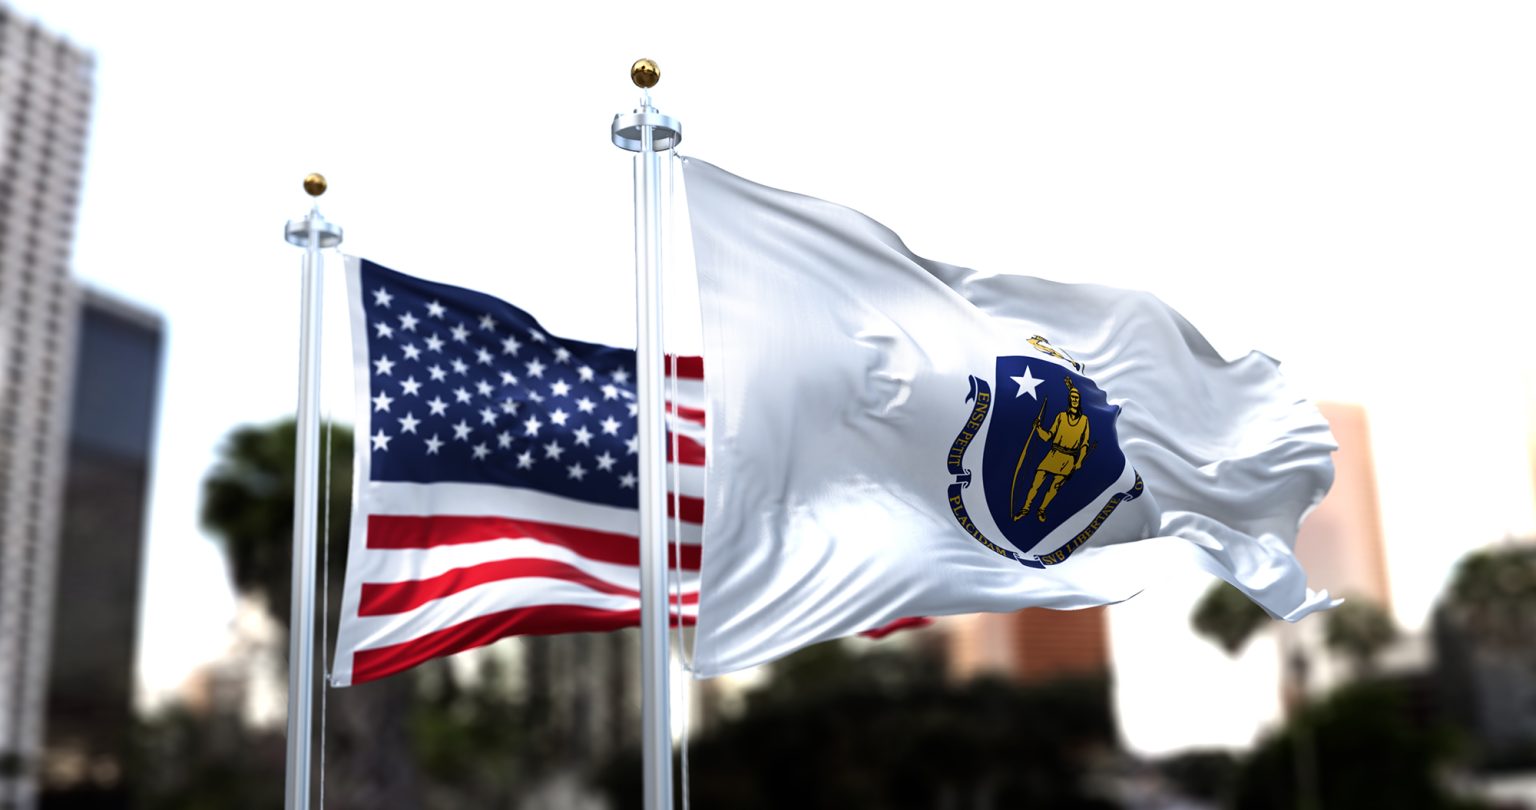 Massachusetts state flag in front of the American flag